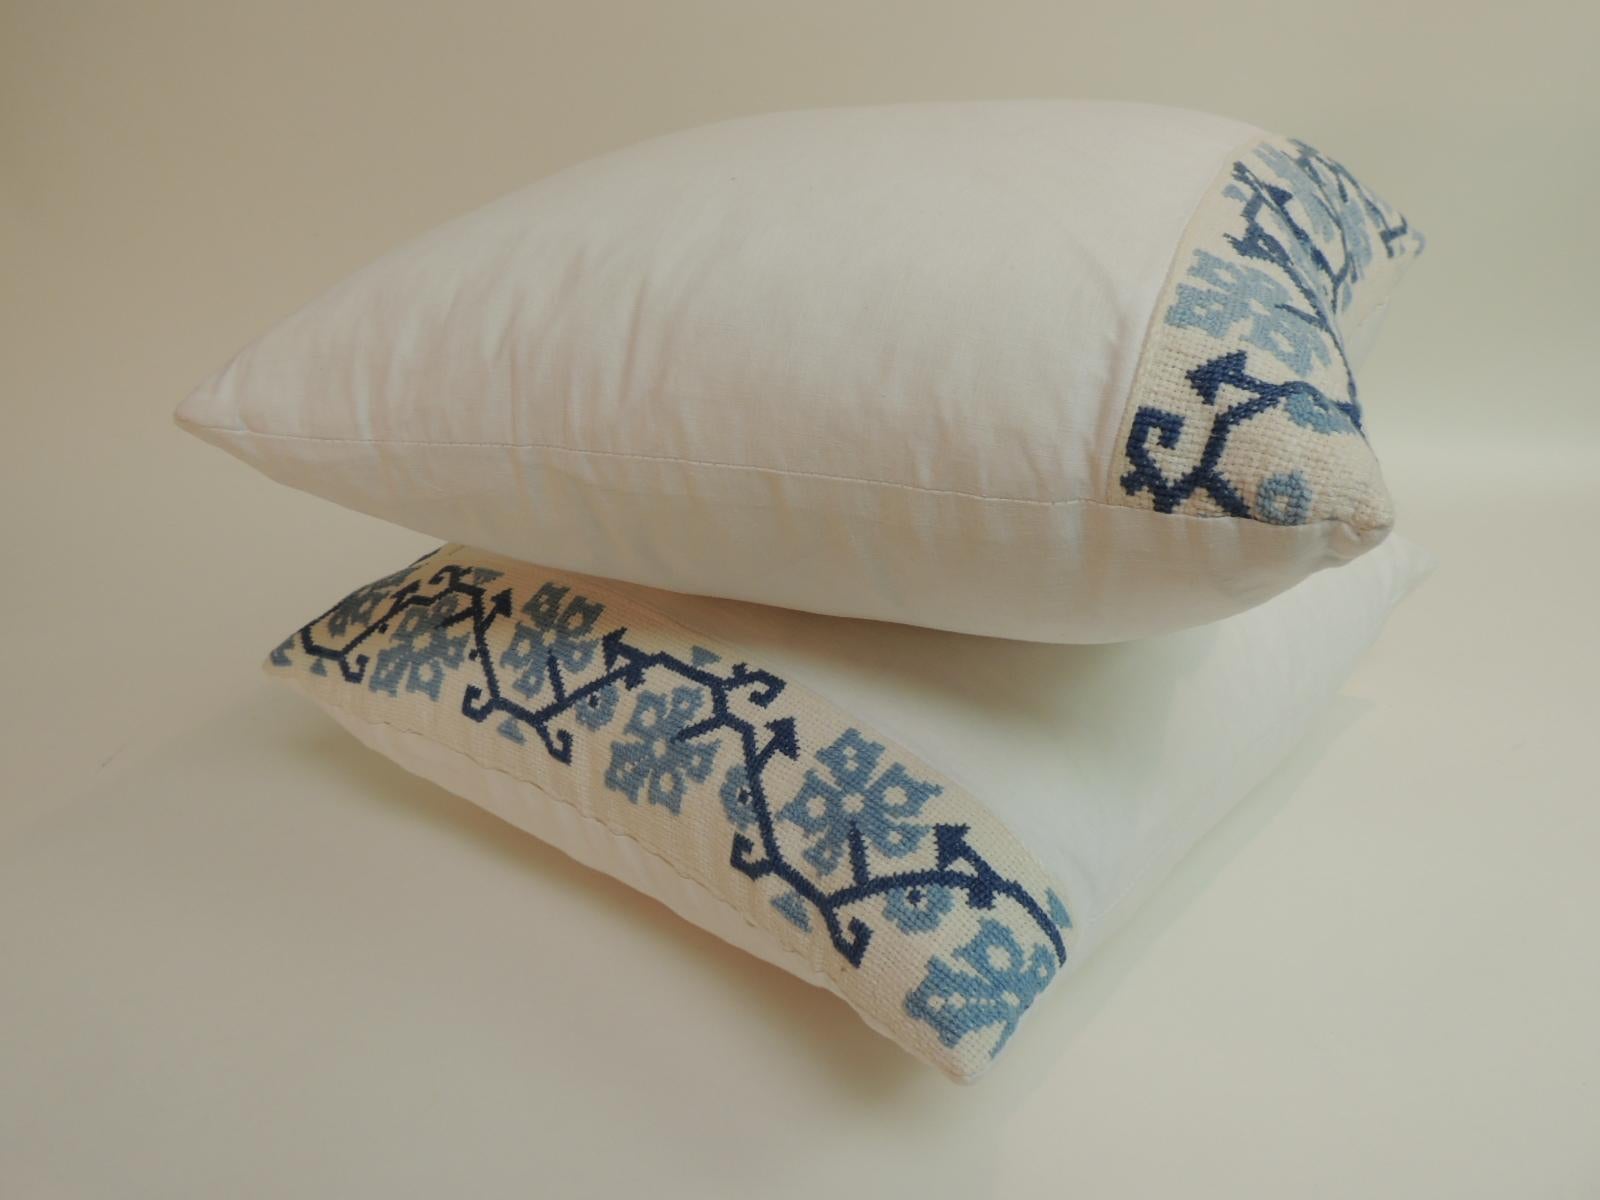 Blue and white Greek isle embroidered decorative pillows. 
Blue and white cross-stitched embroidery border on to white linen.
 White cotton backings. Accent pillows handmade and designed in the USA. 
Closure by stitch (no zipper) with custom made